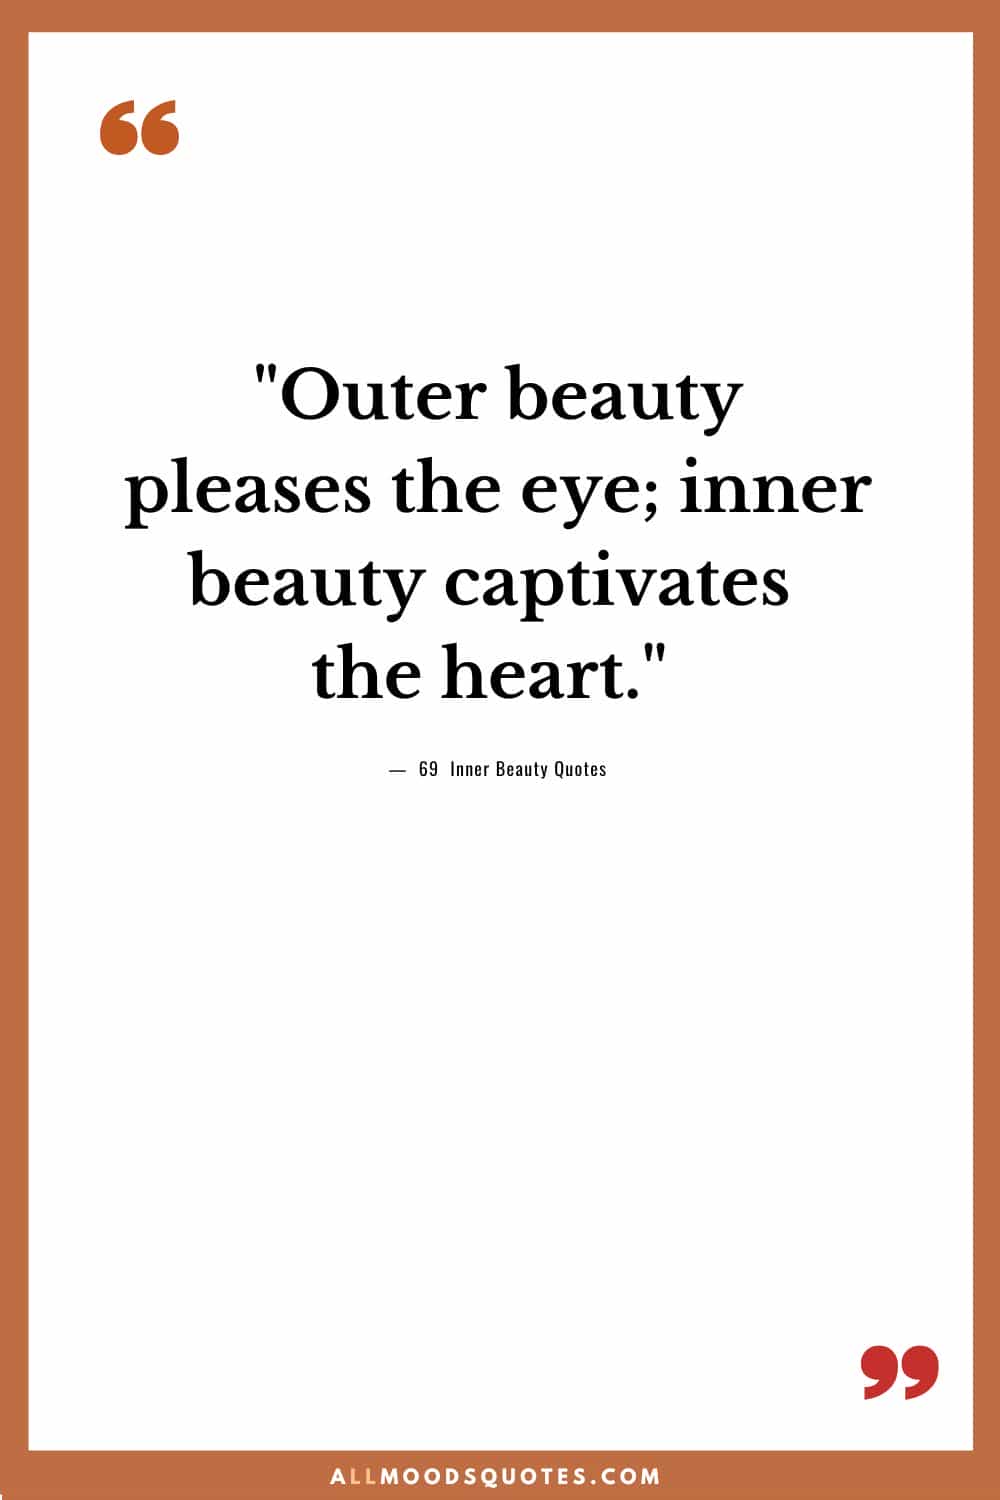 Outer beauty pleases the eye. Inner beauty captivates the heart